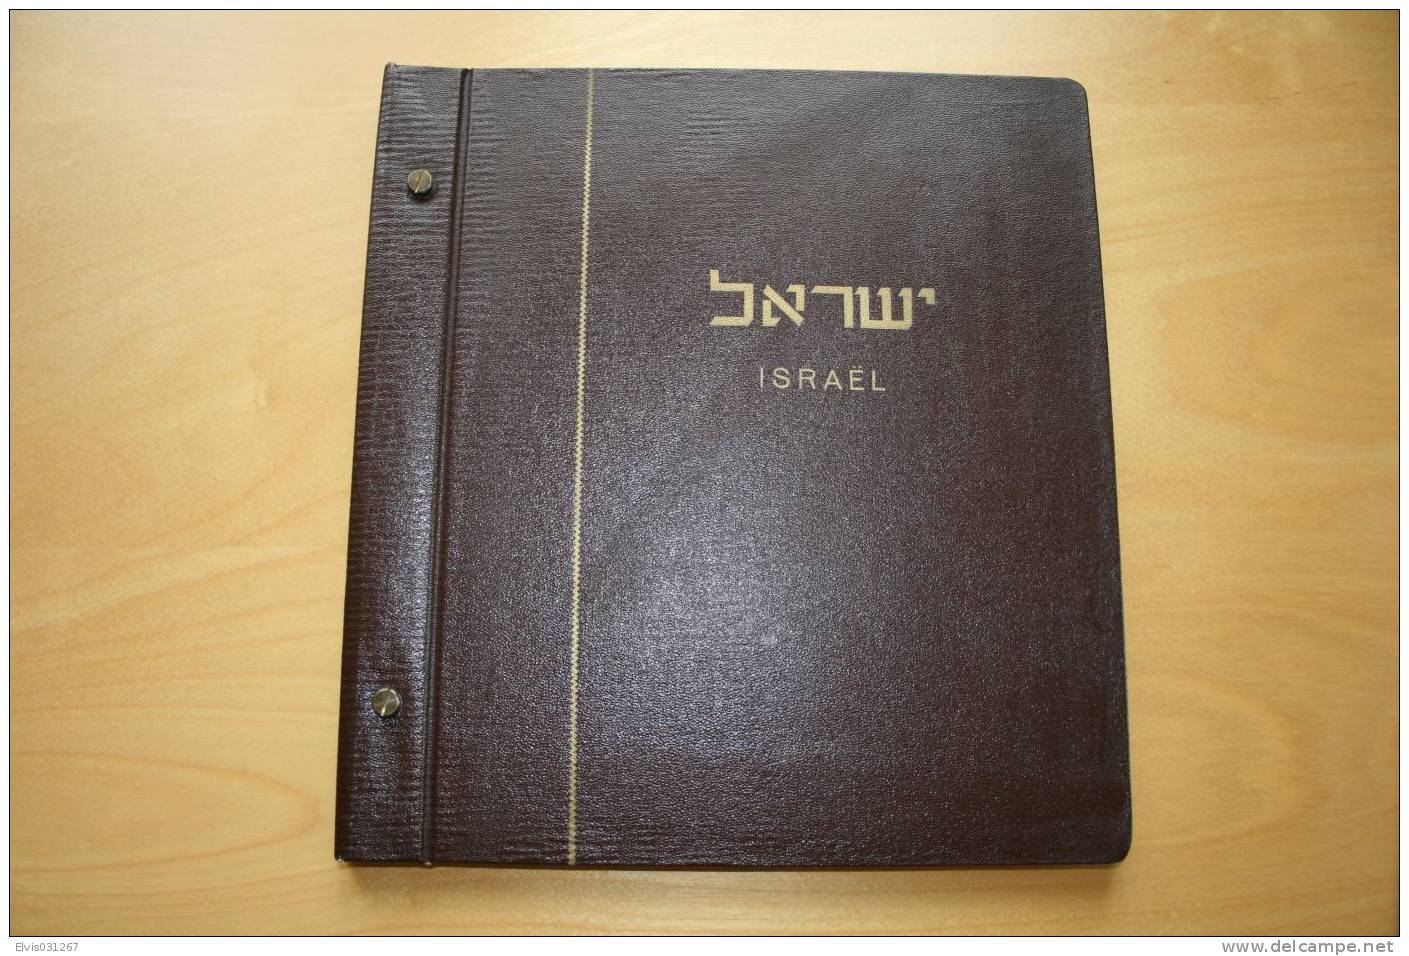 Israel Album - 1948-1961, Antique ERKA Album With Israel Pages - Years 1948->1961 - Large Format, White Pages